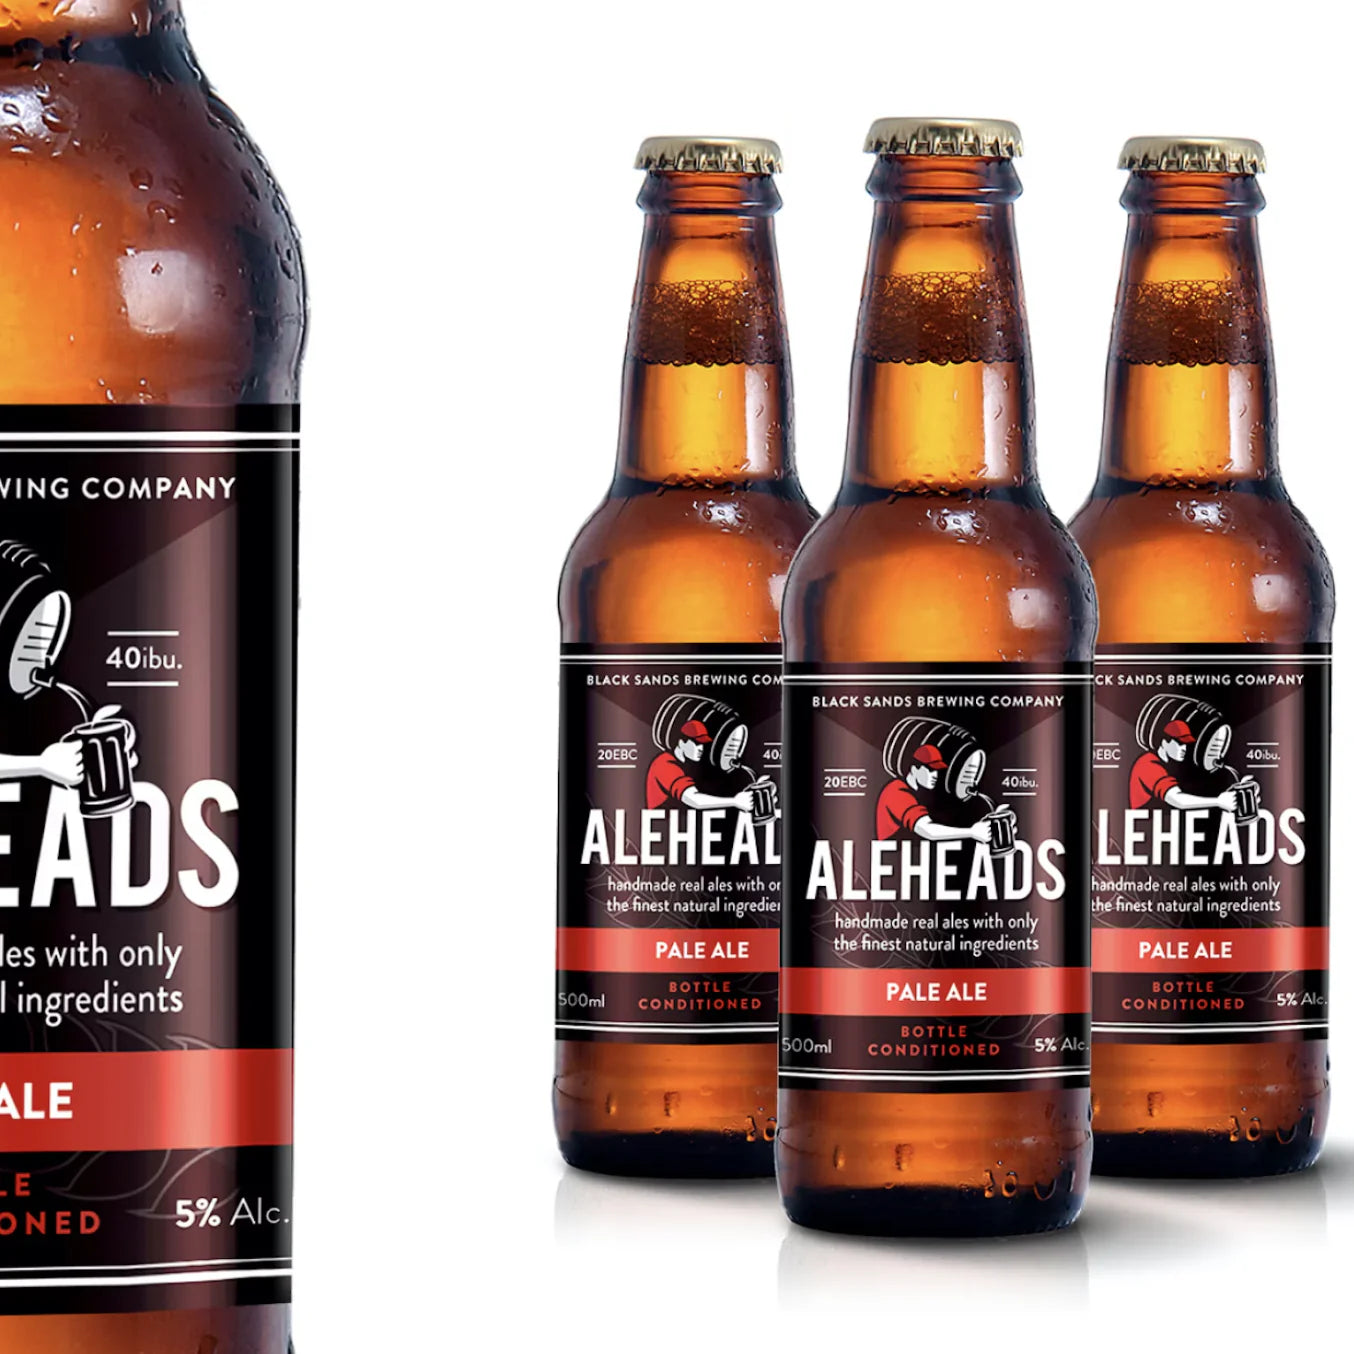 High-Quality Custom Brewery Labels Durable & Vibrant Designs